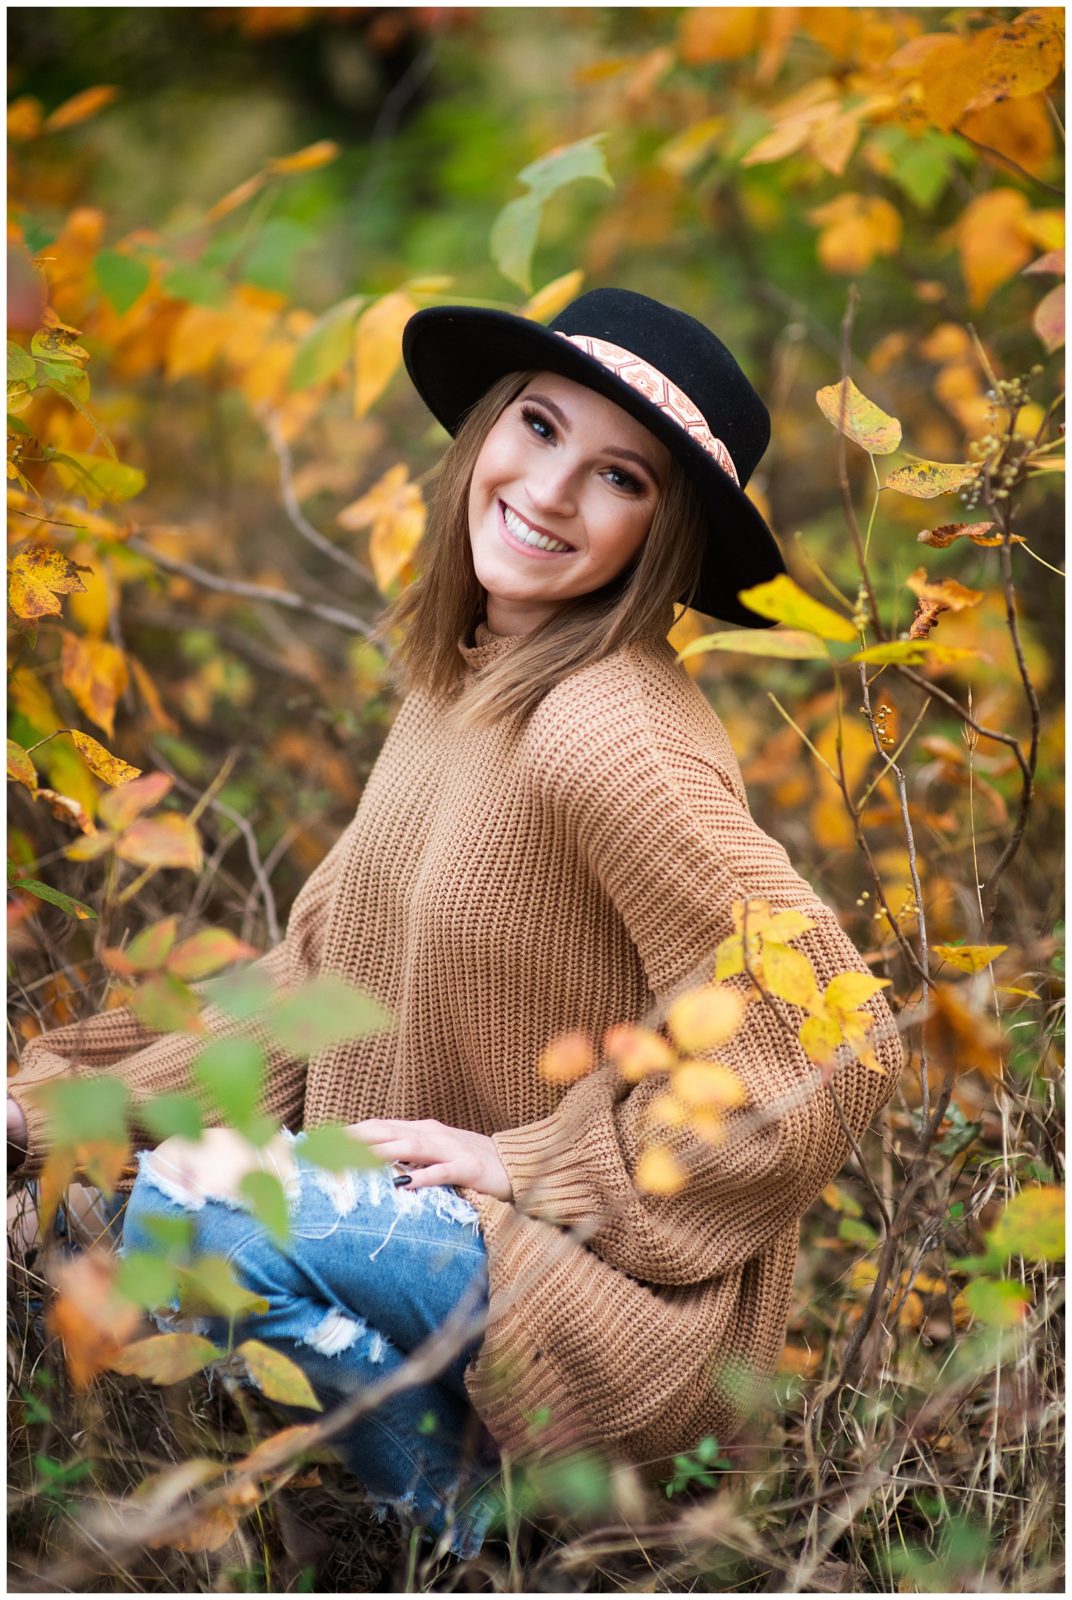 Best locations for senior pictures in Wichita, KS